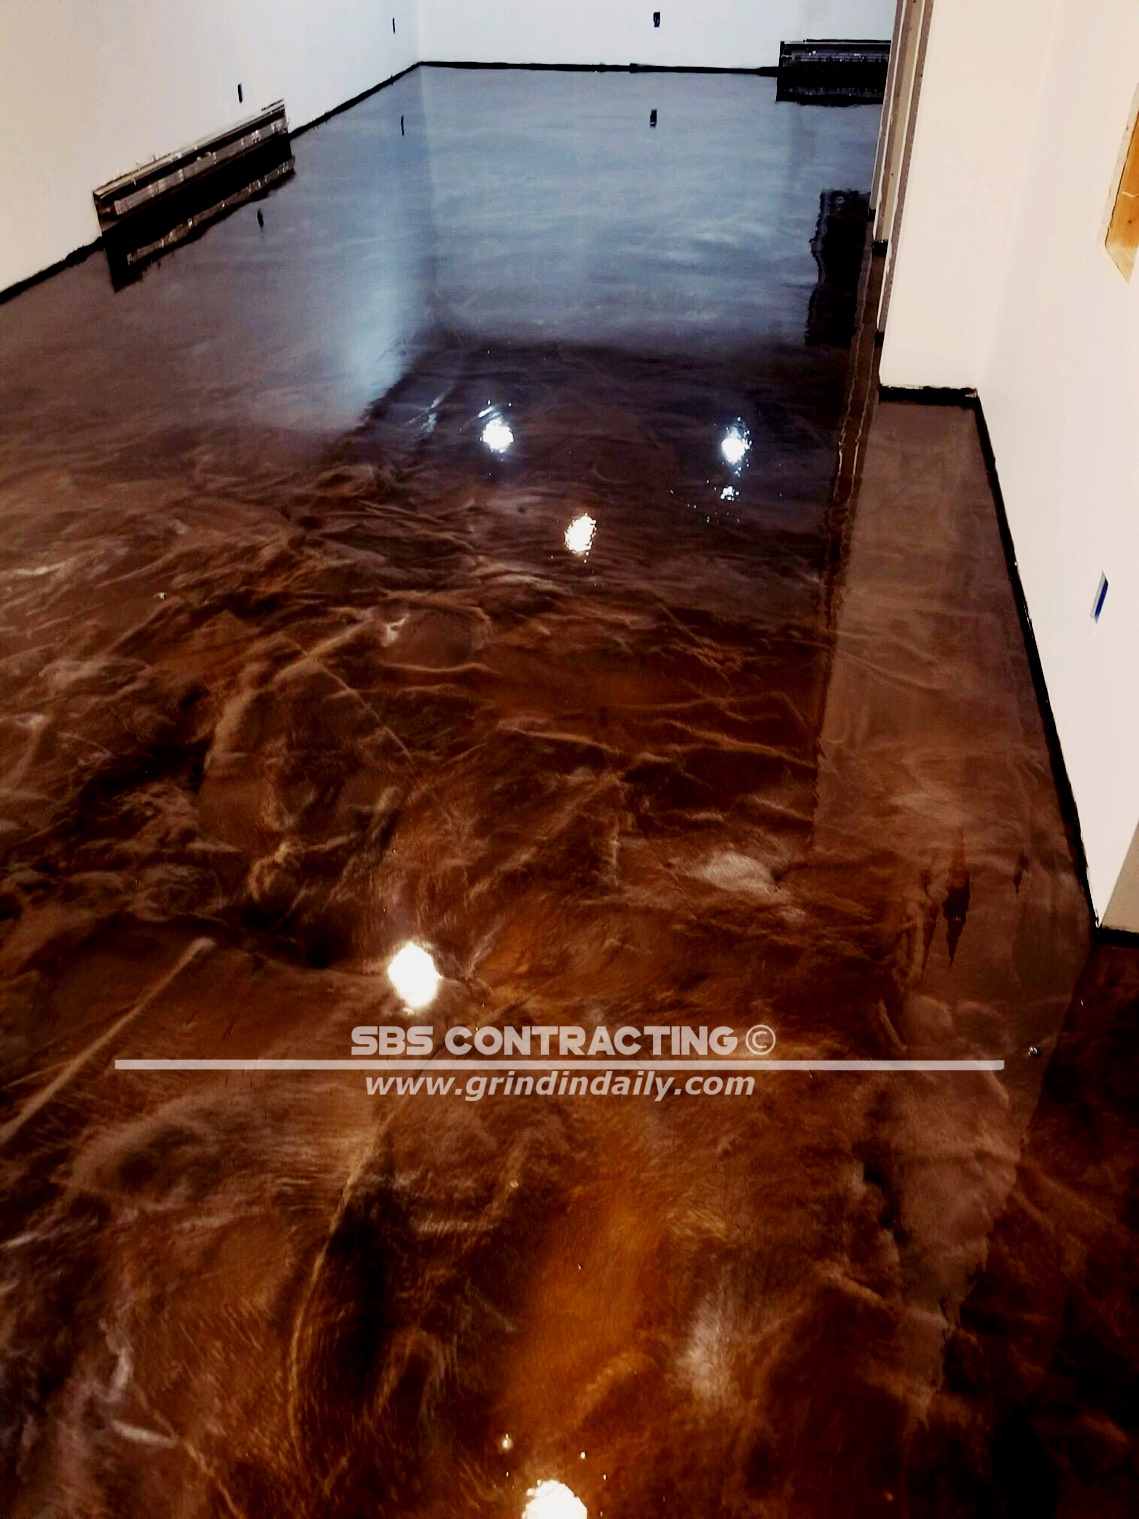 SBS-Contracting-Concrete-Stain-Project-Metallic-02-2018-01-01